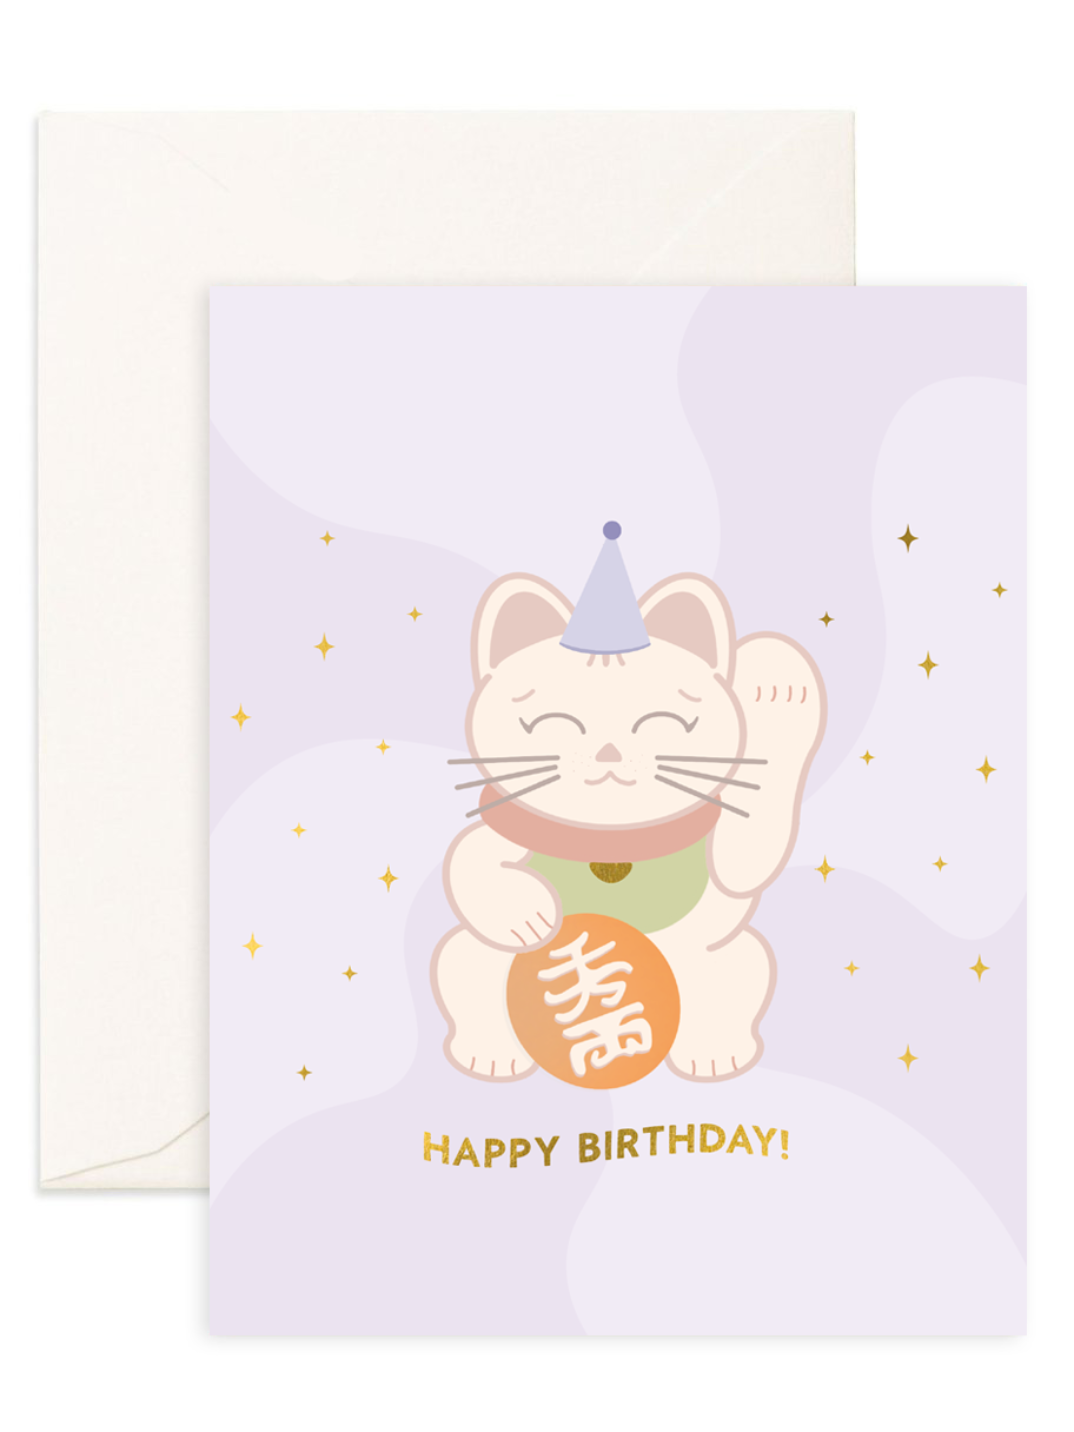 Hong Kong greeting card printed on recycled paper shop eco-friendly gift birthday card for friends really cute design Chinese cat lucky cat